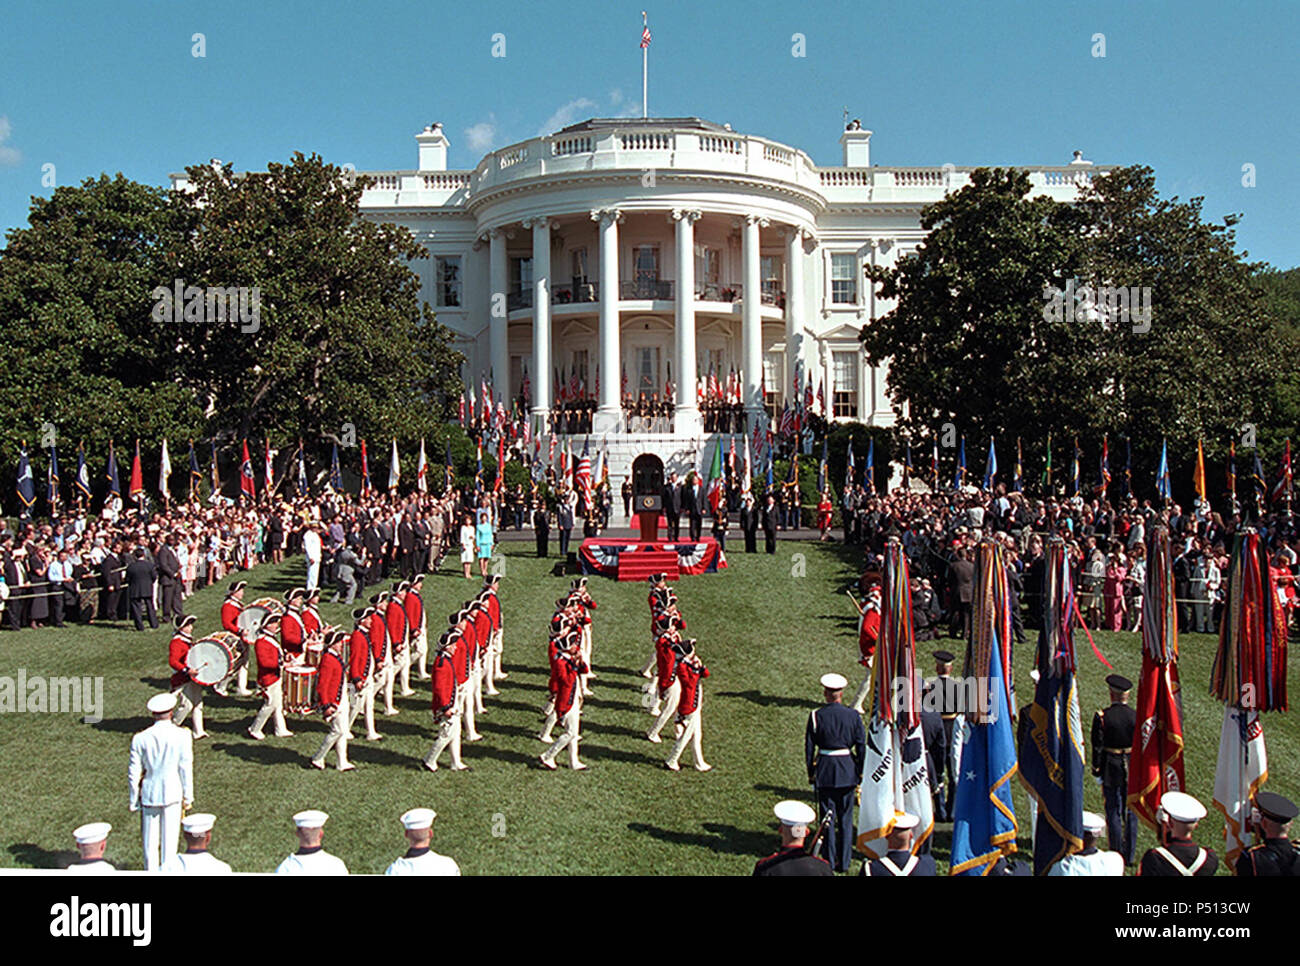 President George W. Bush and Mexico President Vicente Fox participate in the Musical Troop in Review (Army Fife and Drum Corps) during the State Arrival ceremony Wednesday, Sept. 5, 2001, on the South Lawn of the White House. Stock Photo